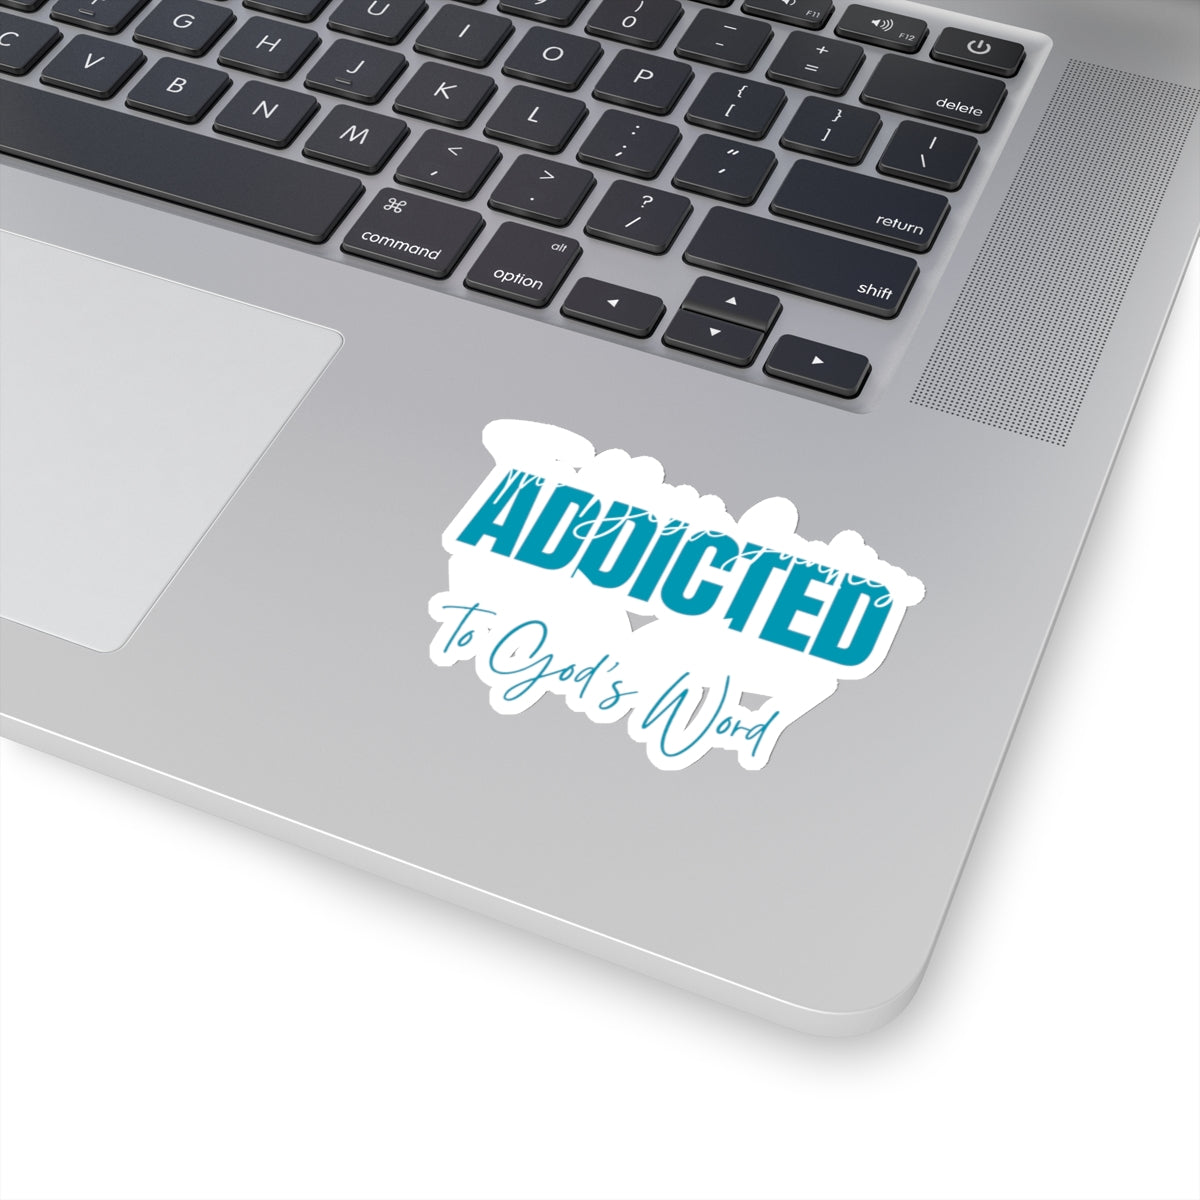 Addicted, Kiss-Cut Stickers - The Bible Junkies®